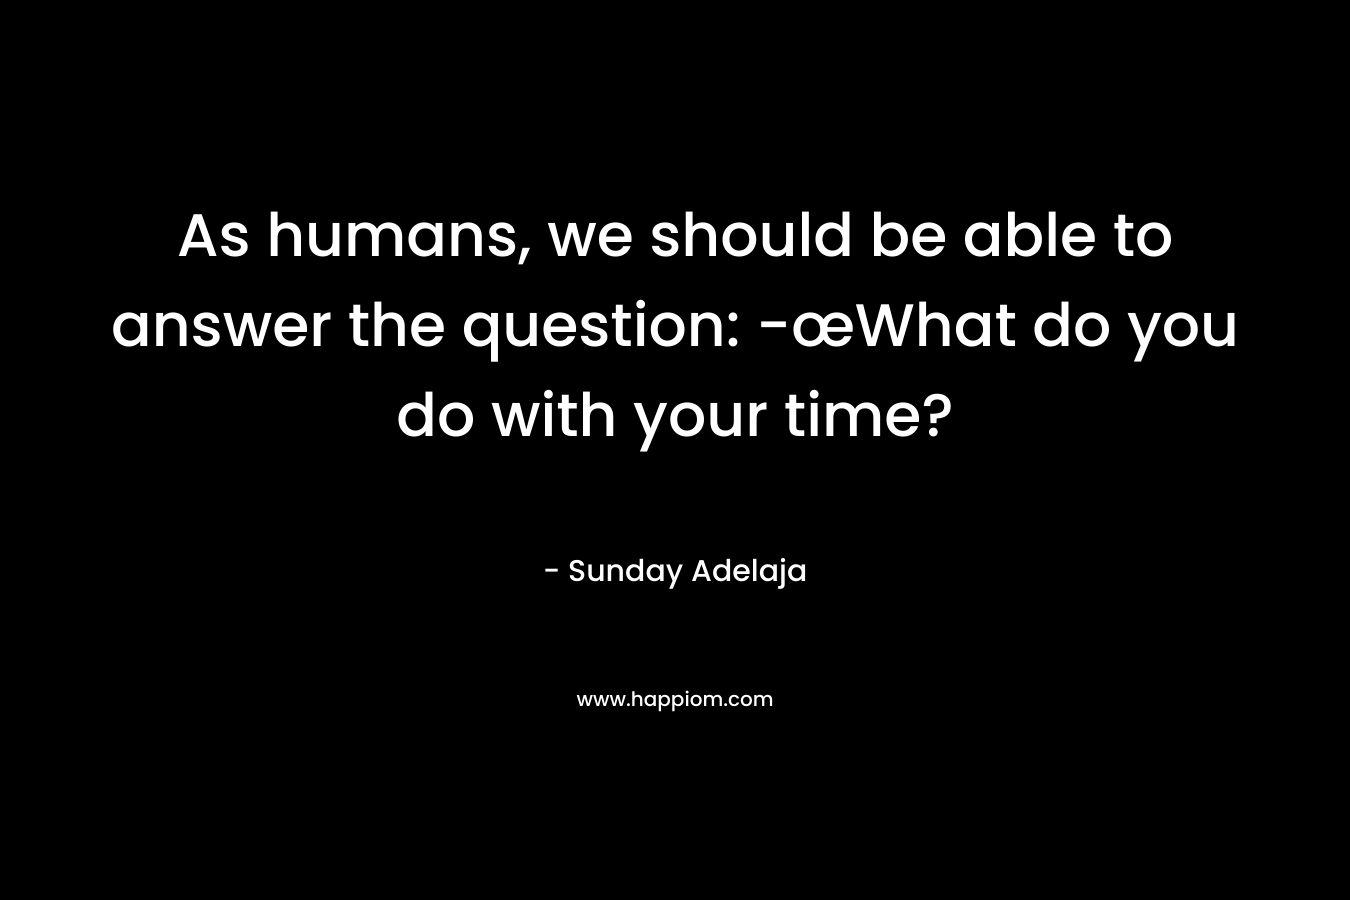 As humans, we should be able to answer the question: -œWhat do you do with your time?